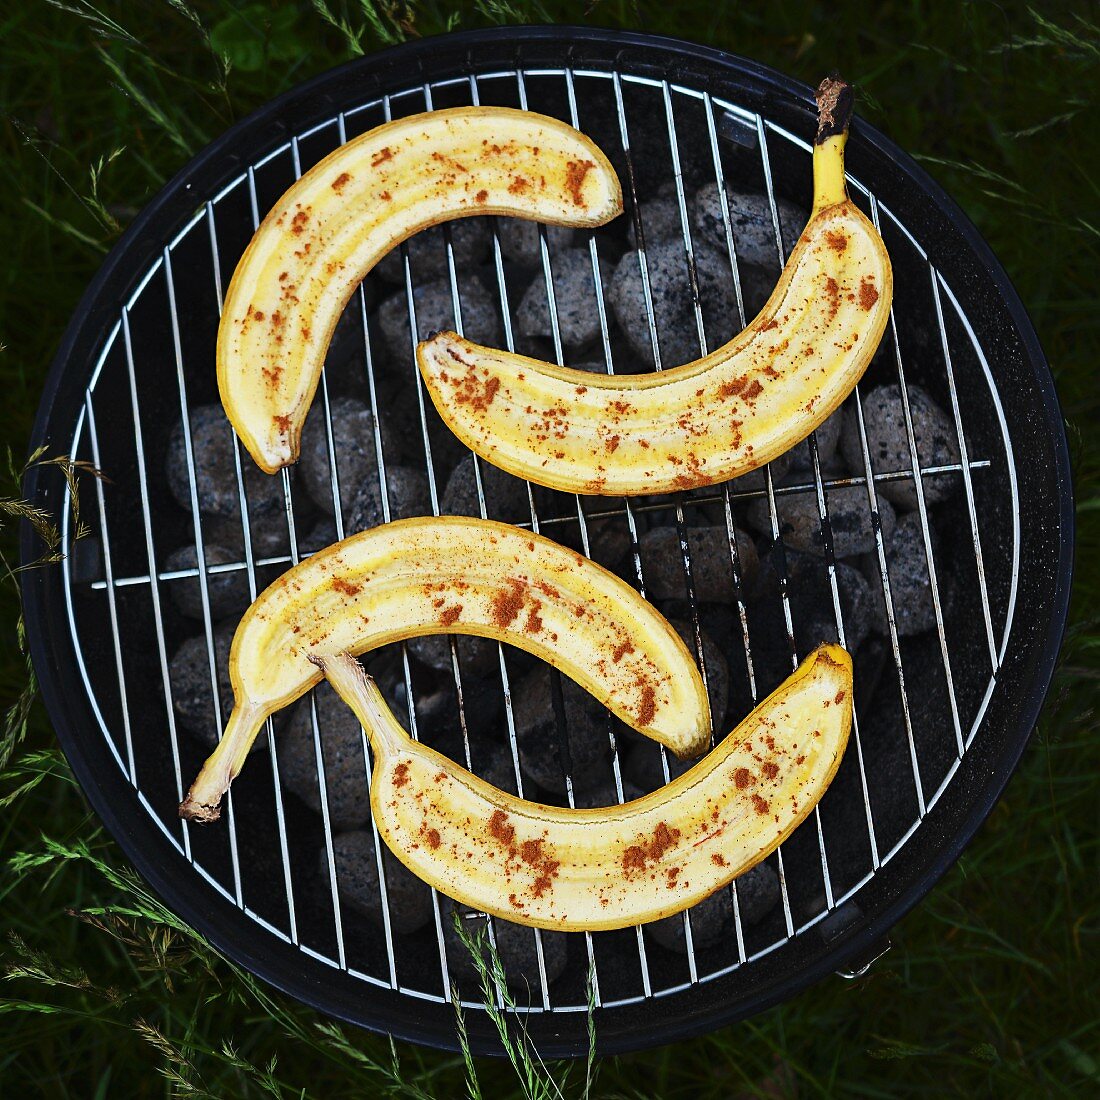 Grilled bananas with cinnamon